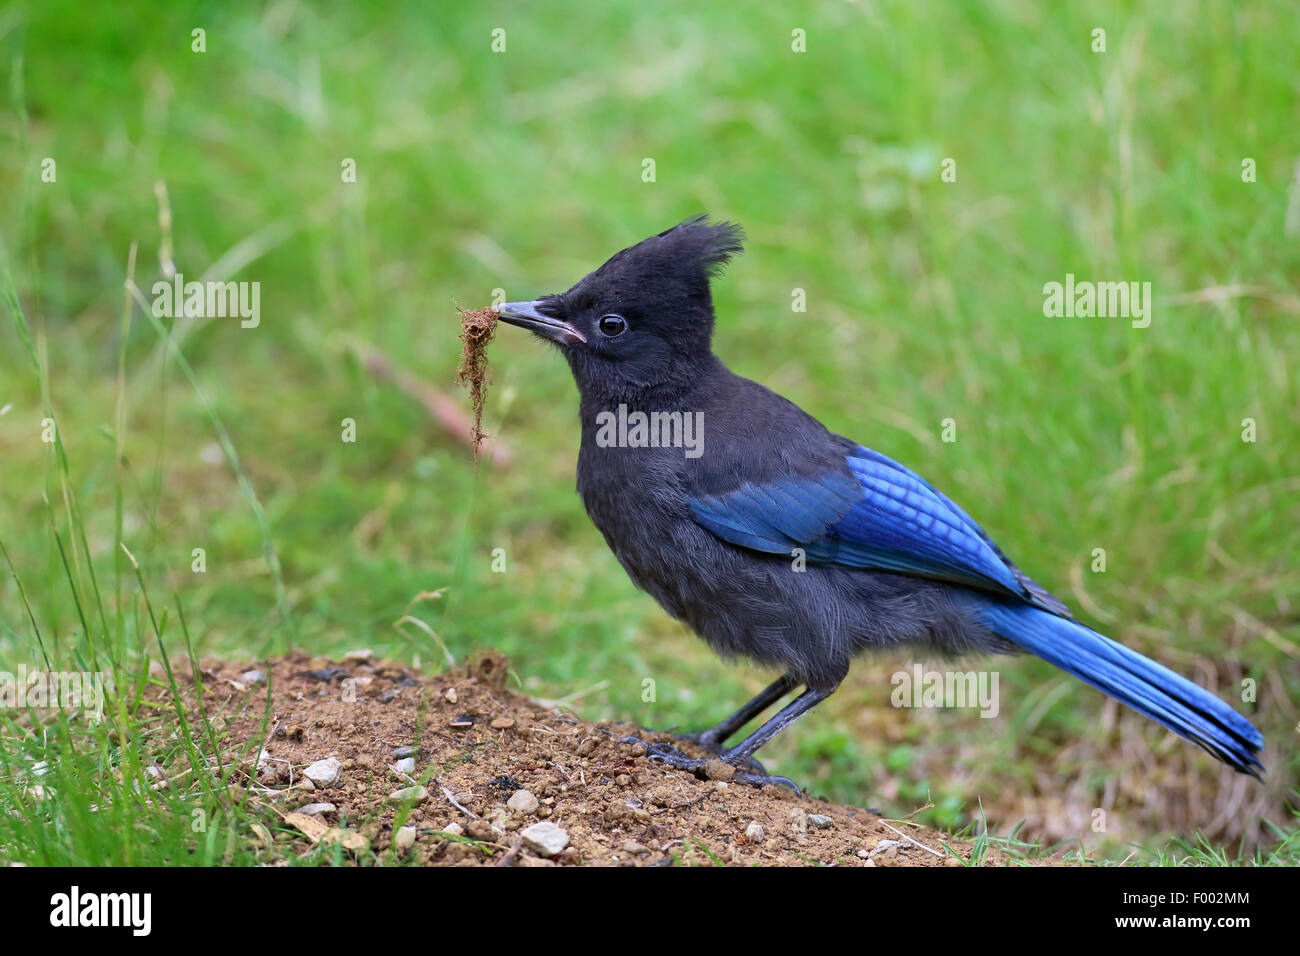 Steller's jay (Cyanocitta stelleri), standing on the ground with nesting material in the bill, Canada, Vancouver Island Stock Photo